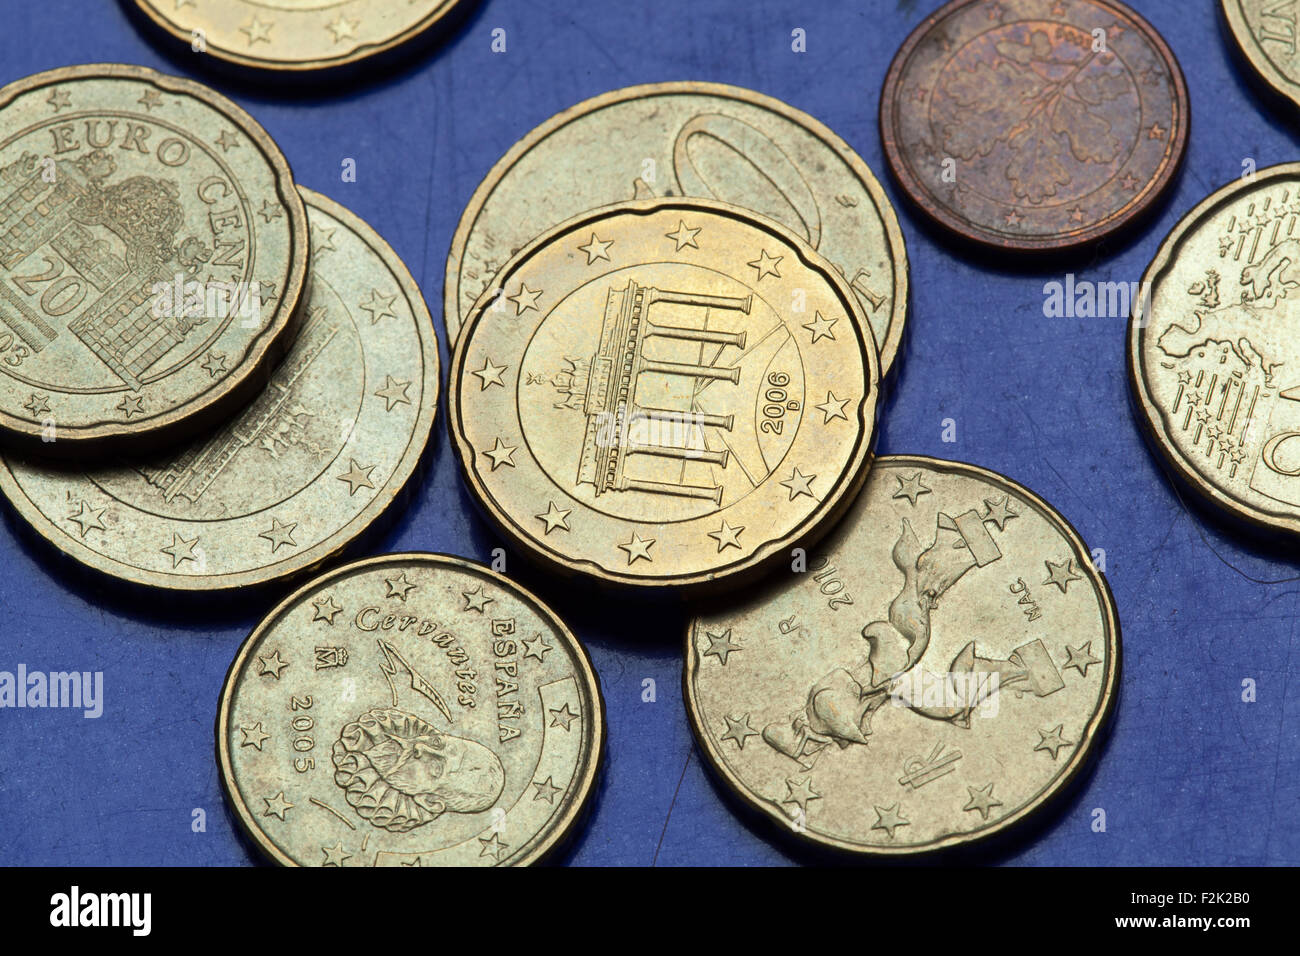 Brandenburg Gate in Berlin, Germany, depicted in the 20 eurocent coin. Coins of the European Union. Stock Photo